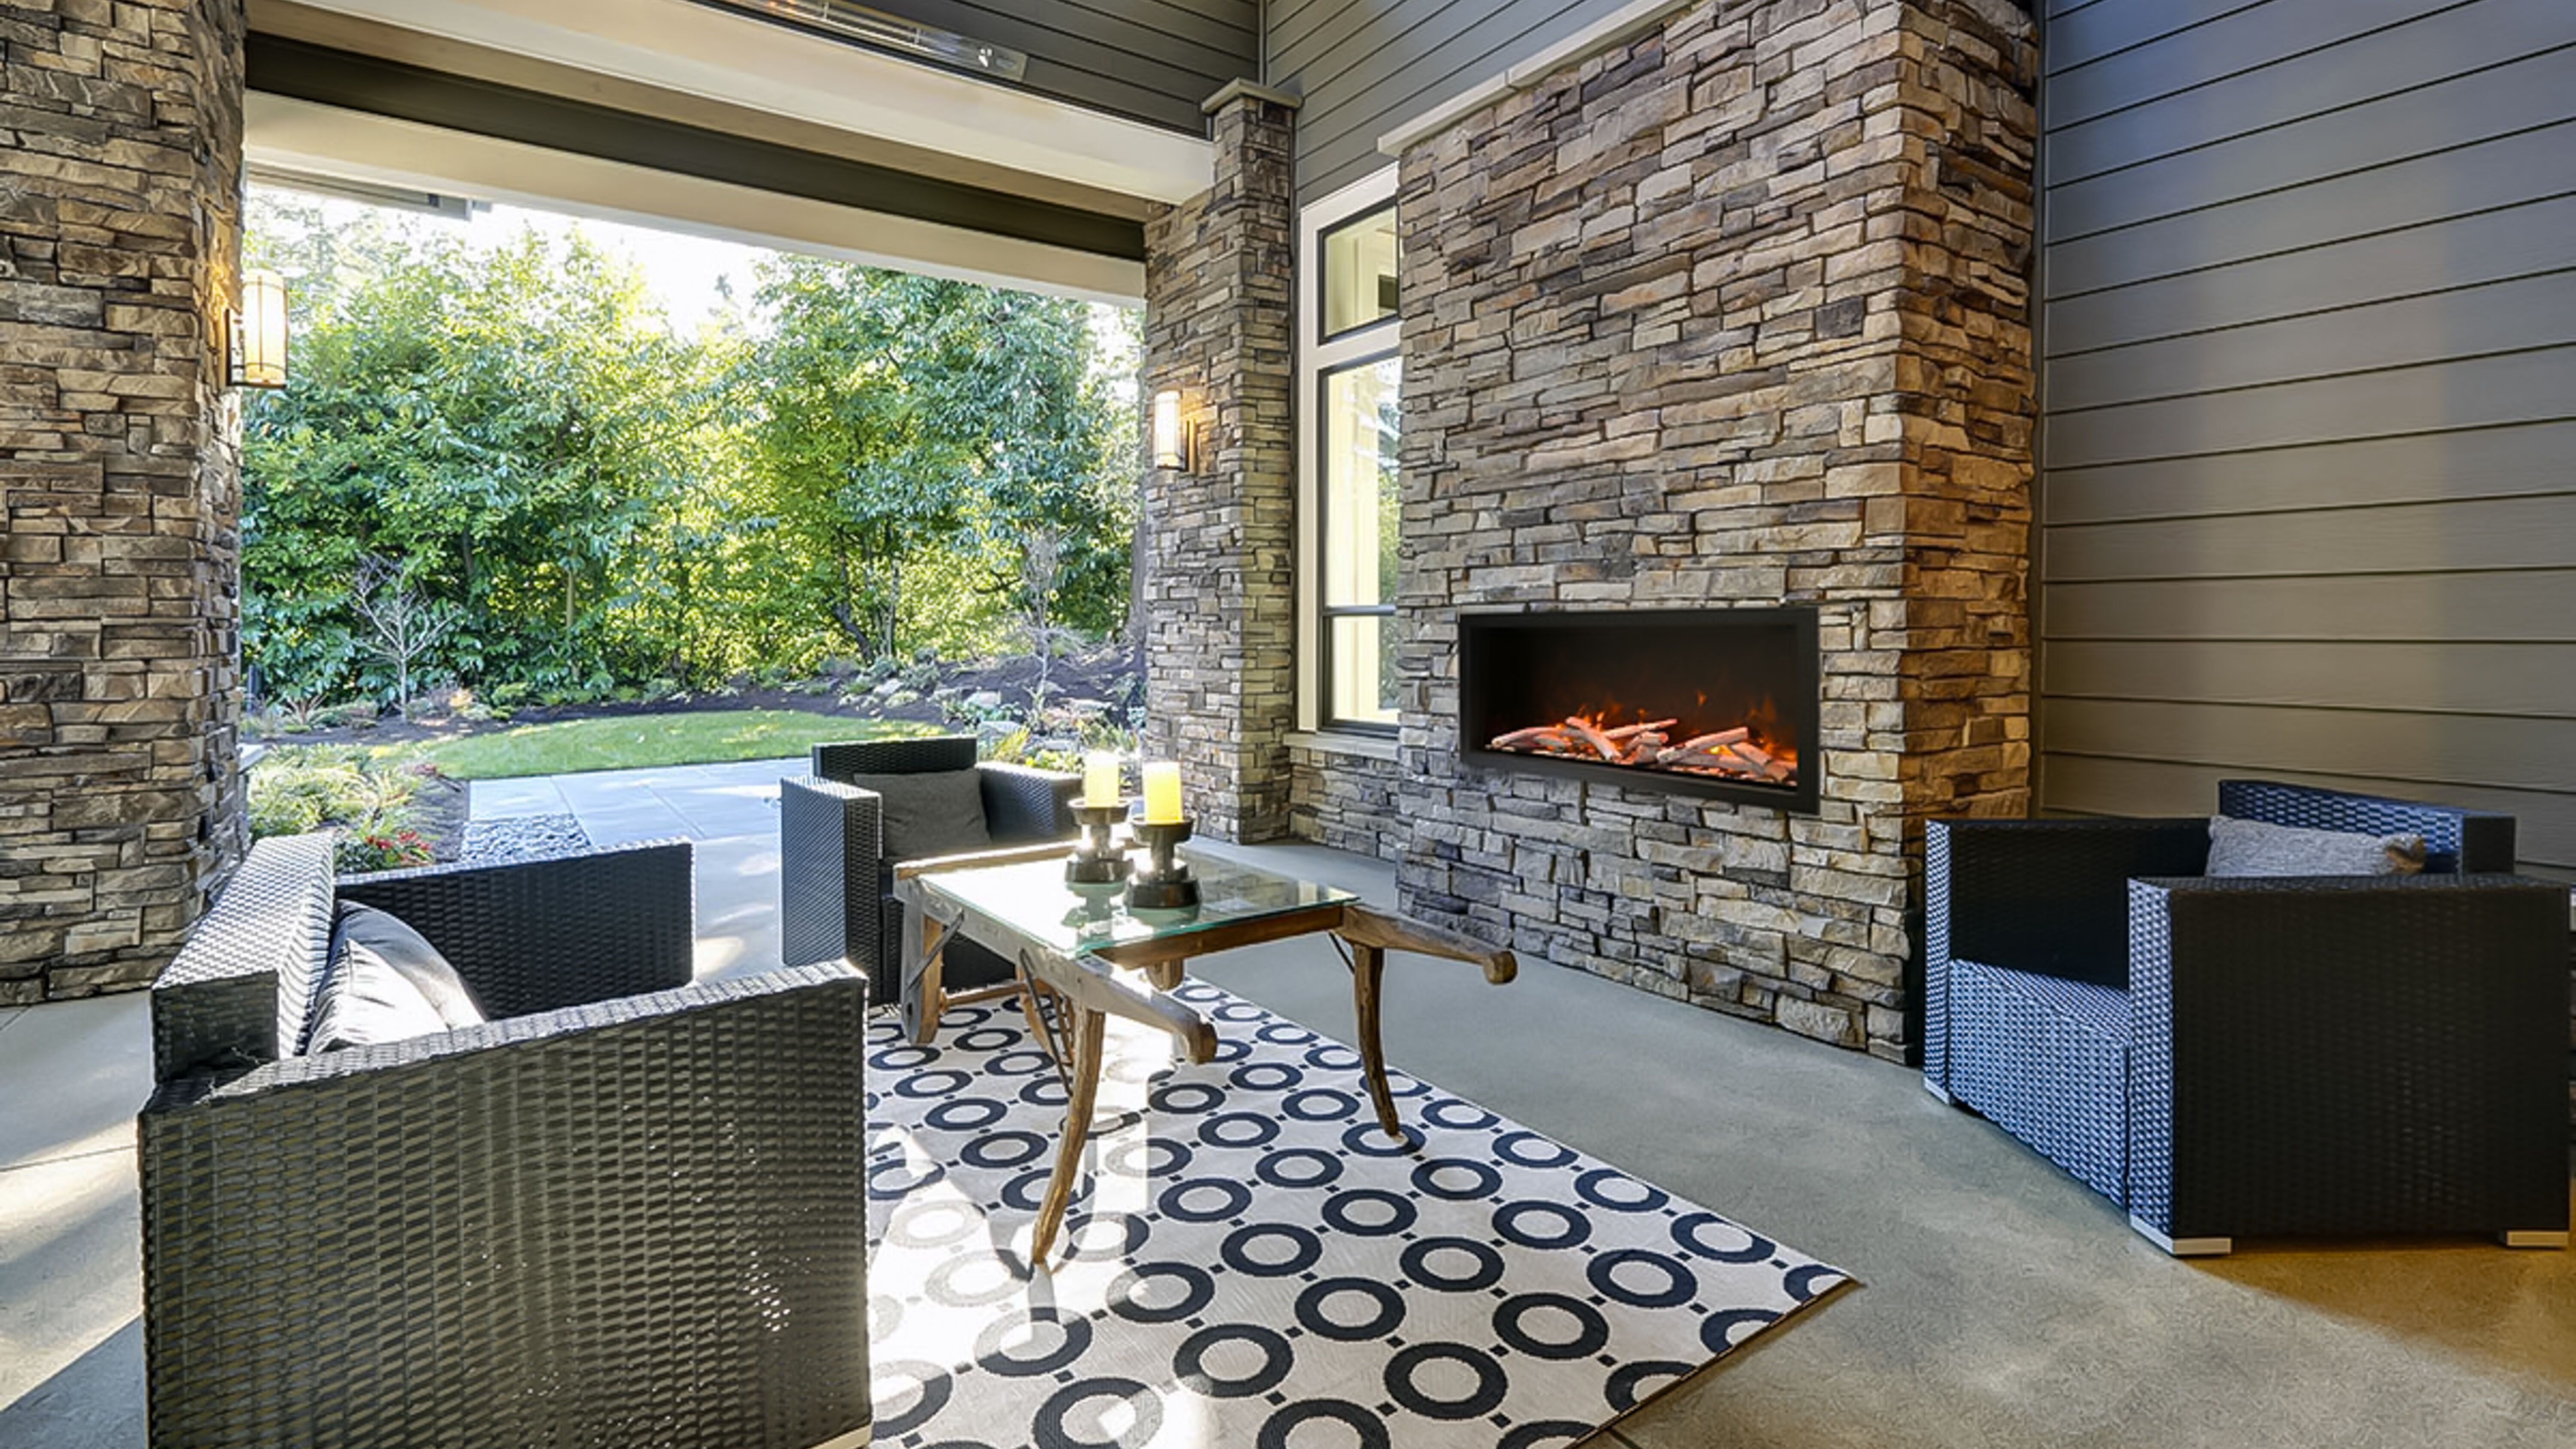 A contemporary covered patio space with a large, angular couch, a wood and glass coffee table, a white area rug with a black circle pattern, and a large natural stone hearth with a large electric fireplace and weathered, Driftwood log set.